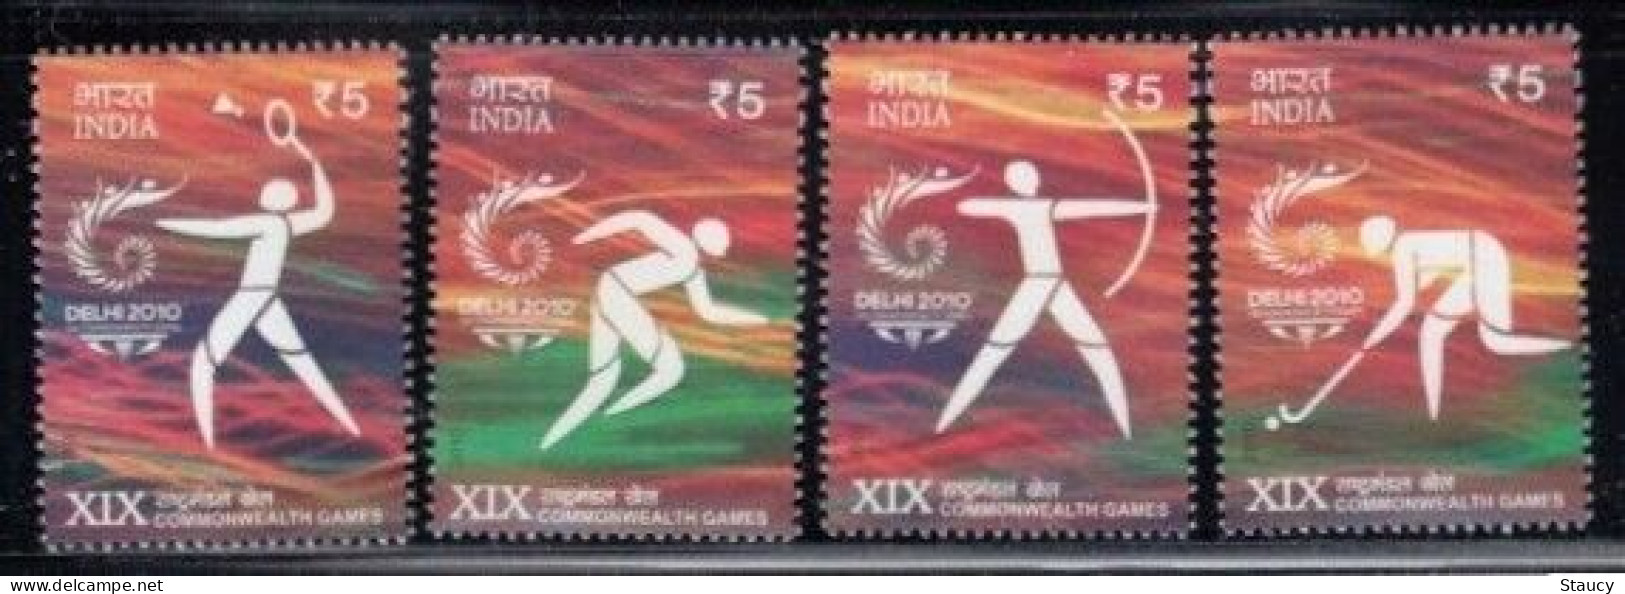 India 2010 Commonwealth Games - Archery 4v Set MNH As Per Scan - Wrestling